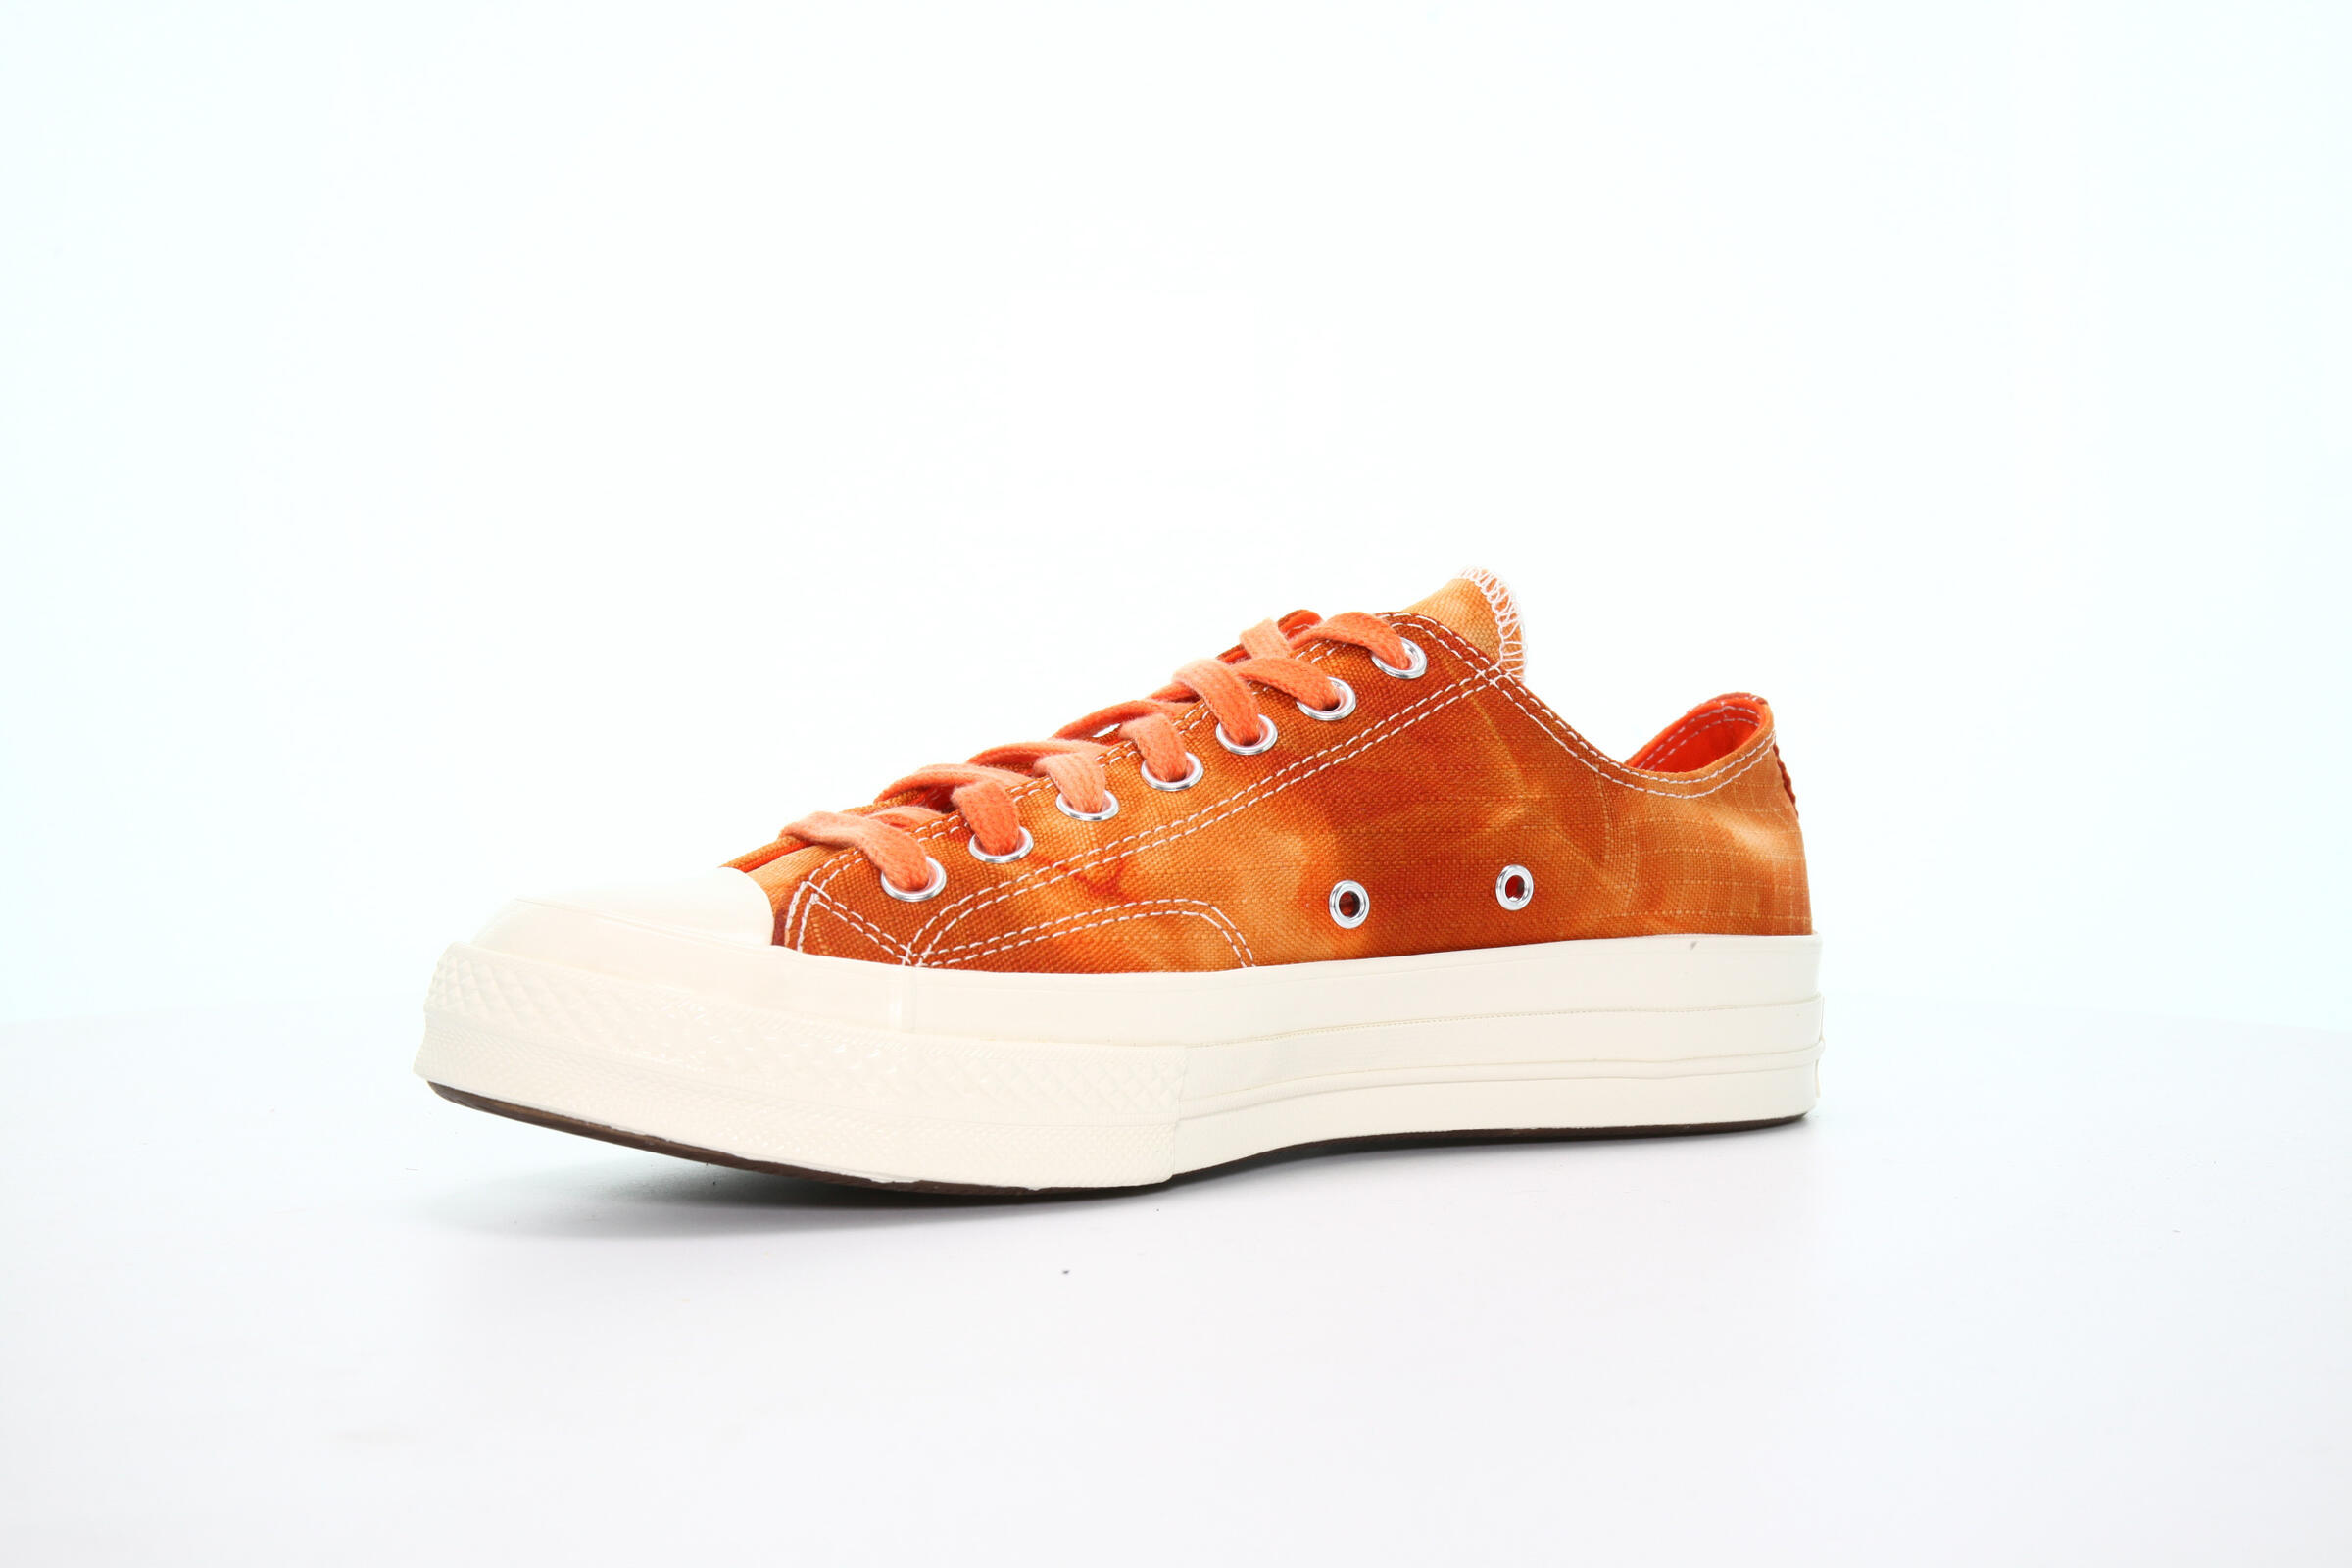 Converse CHUCK 70 OX TWISTED VACATION PACK "VENETIAN RUST"